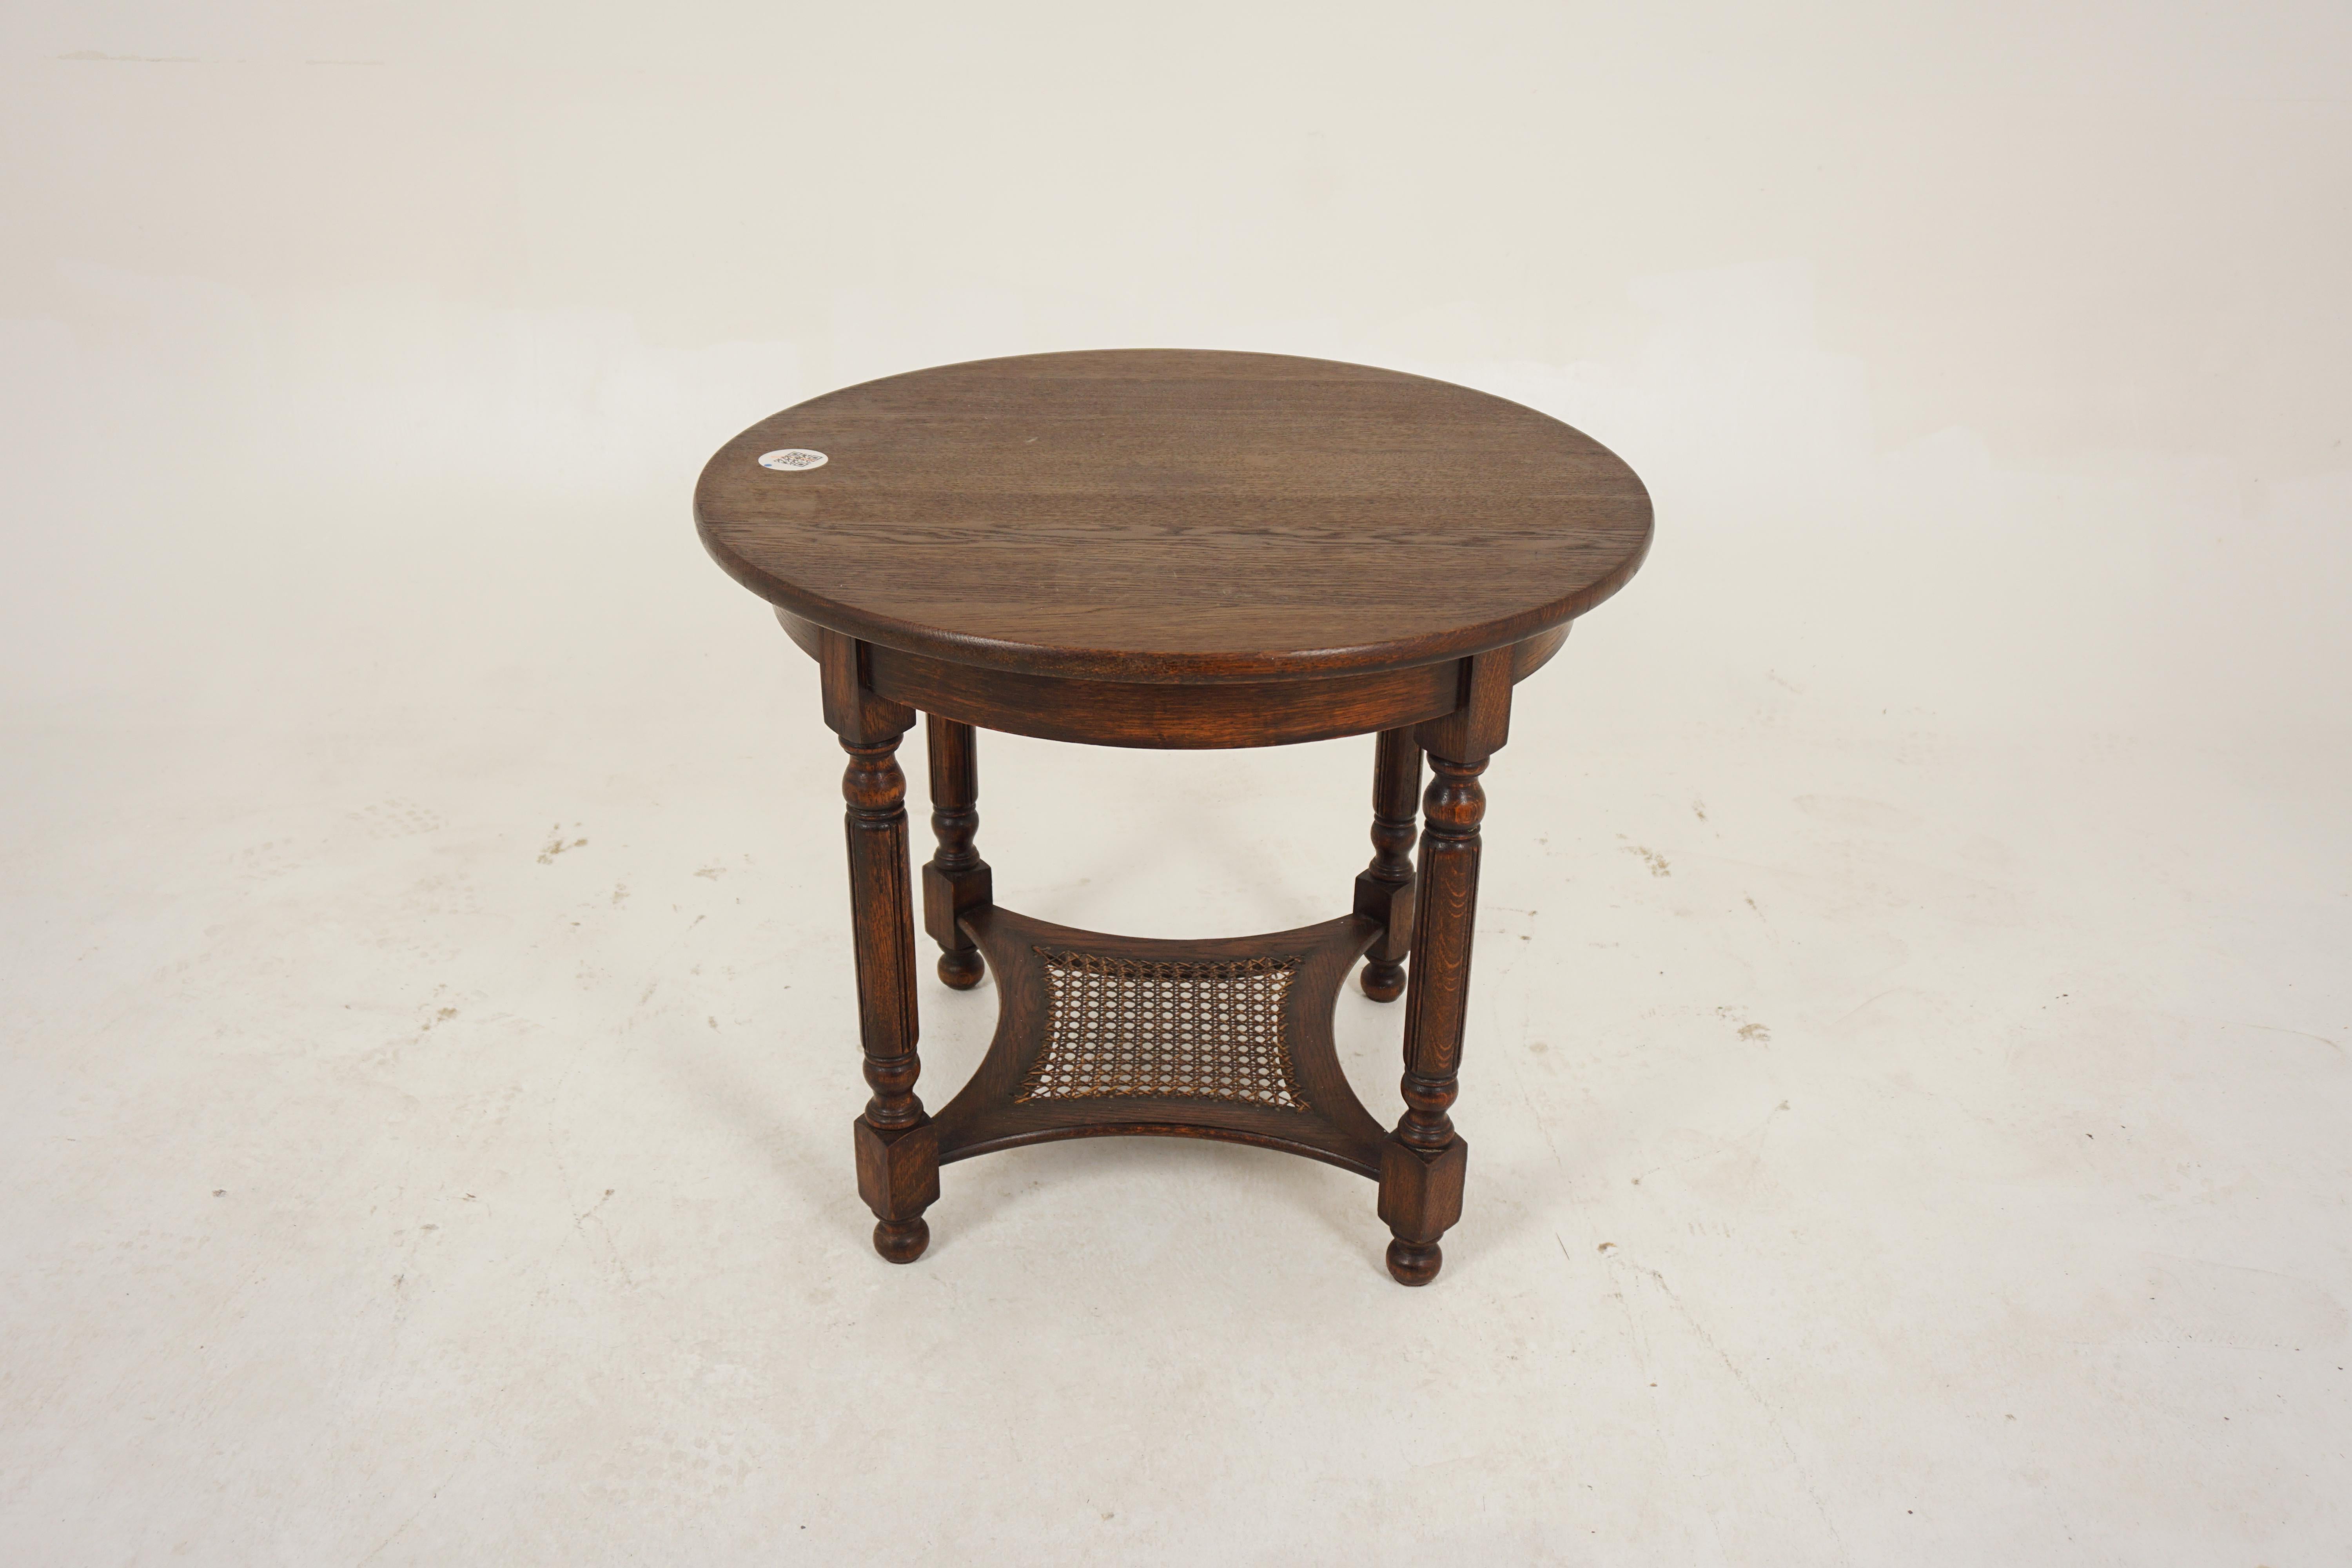 Vintage circular oak coffee table, end table, Scotland 1930, H497

Scotland 1930
Solid oak
Original finish
Circular Oak Top
Standing on four turned legs
Connected by a caned undershelf
Ending on bum feet
Very clean and in good solid